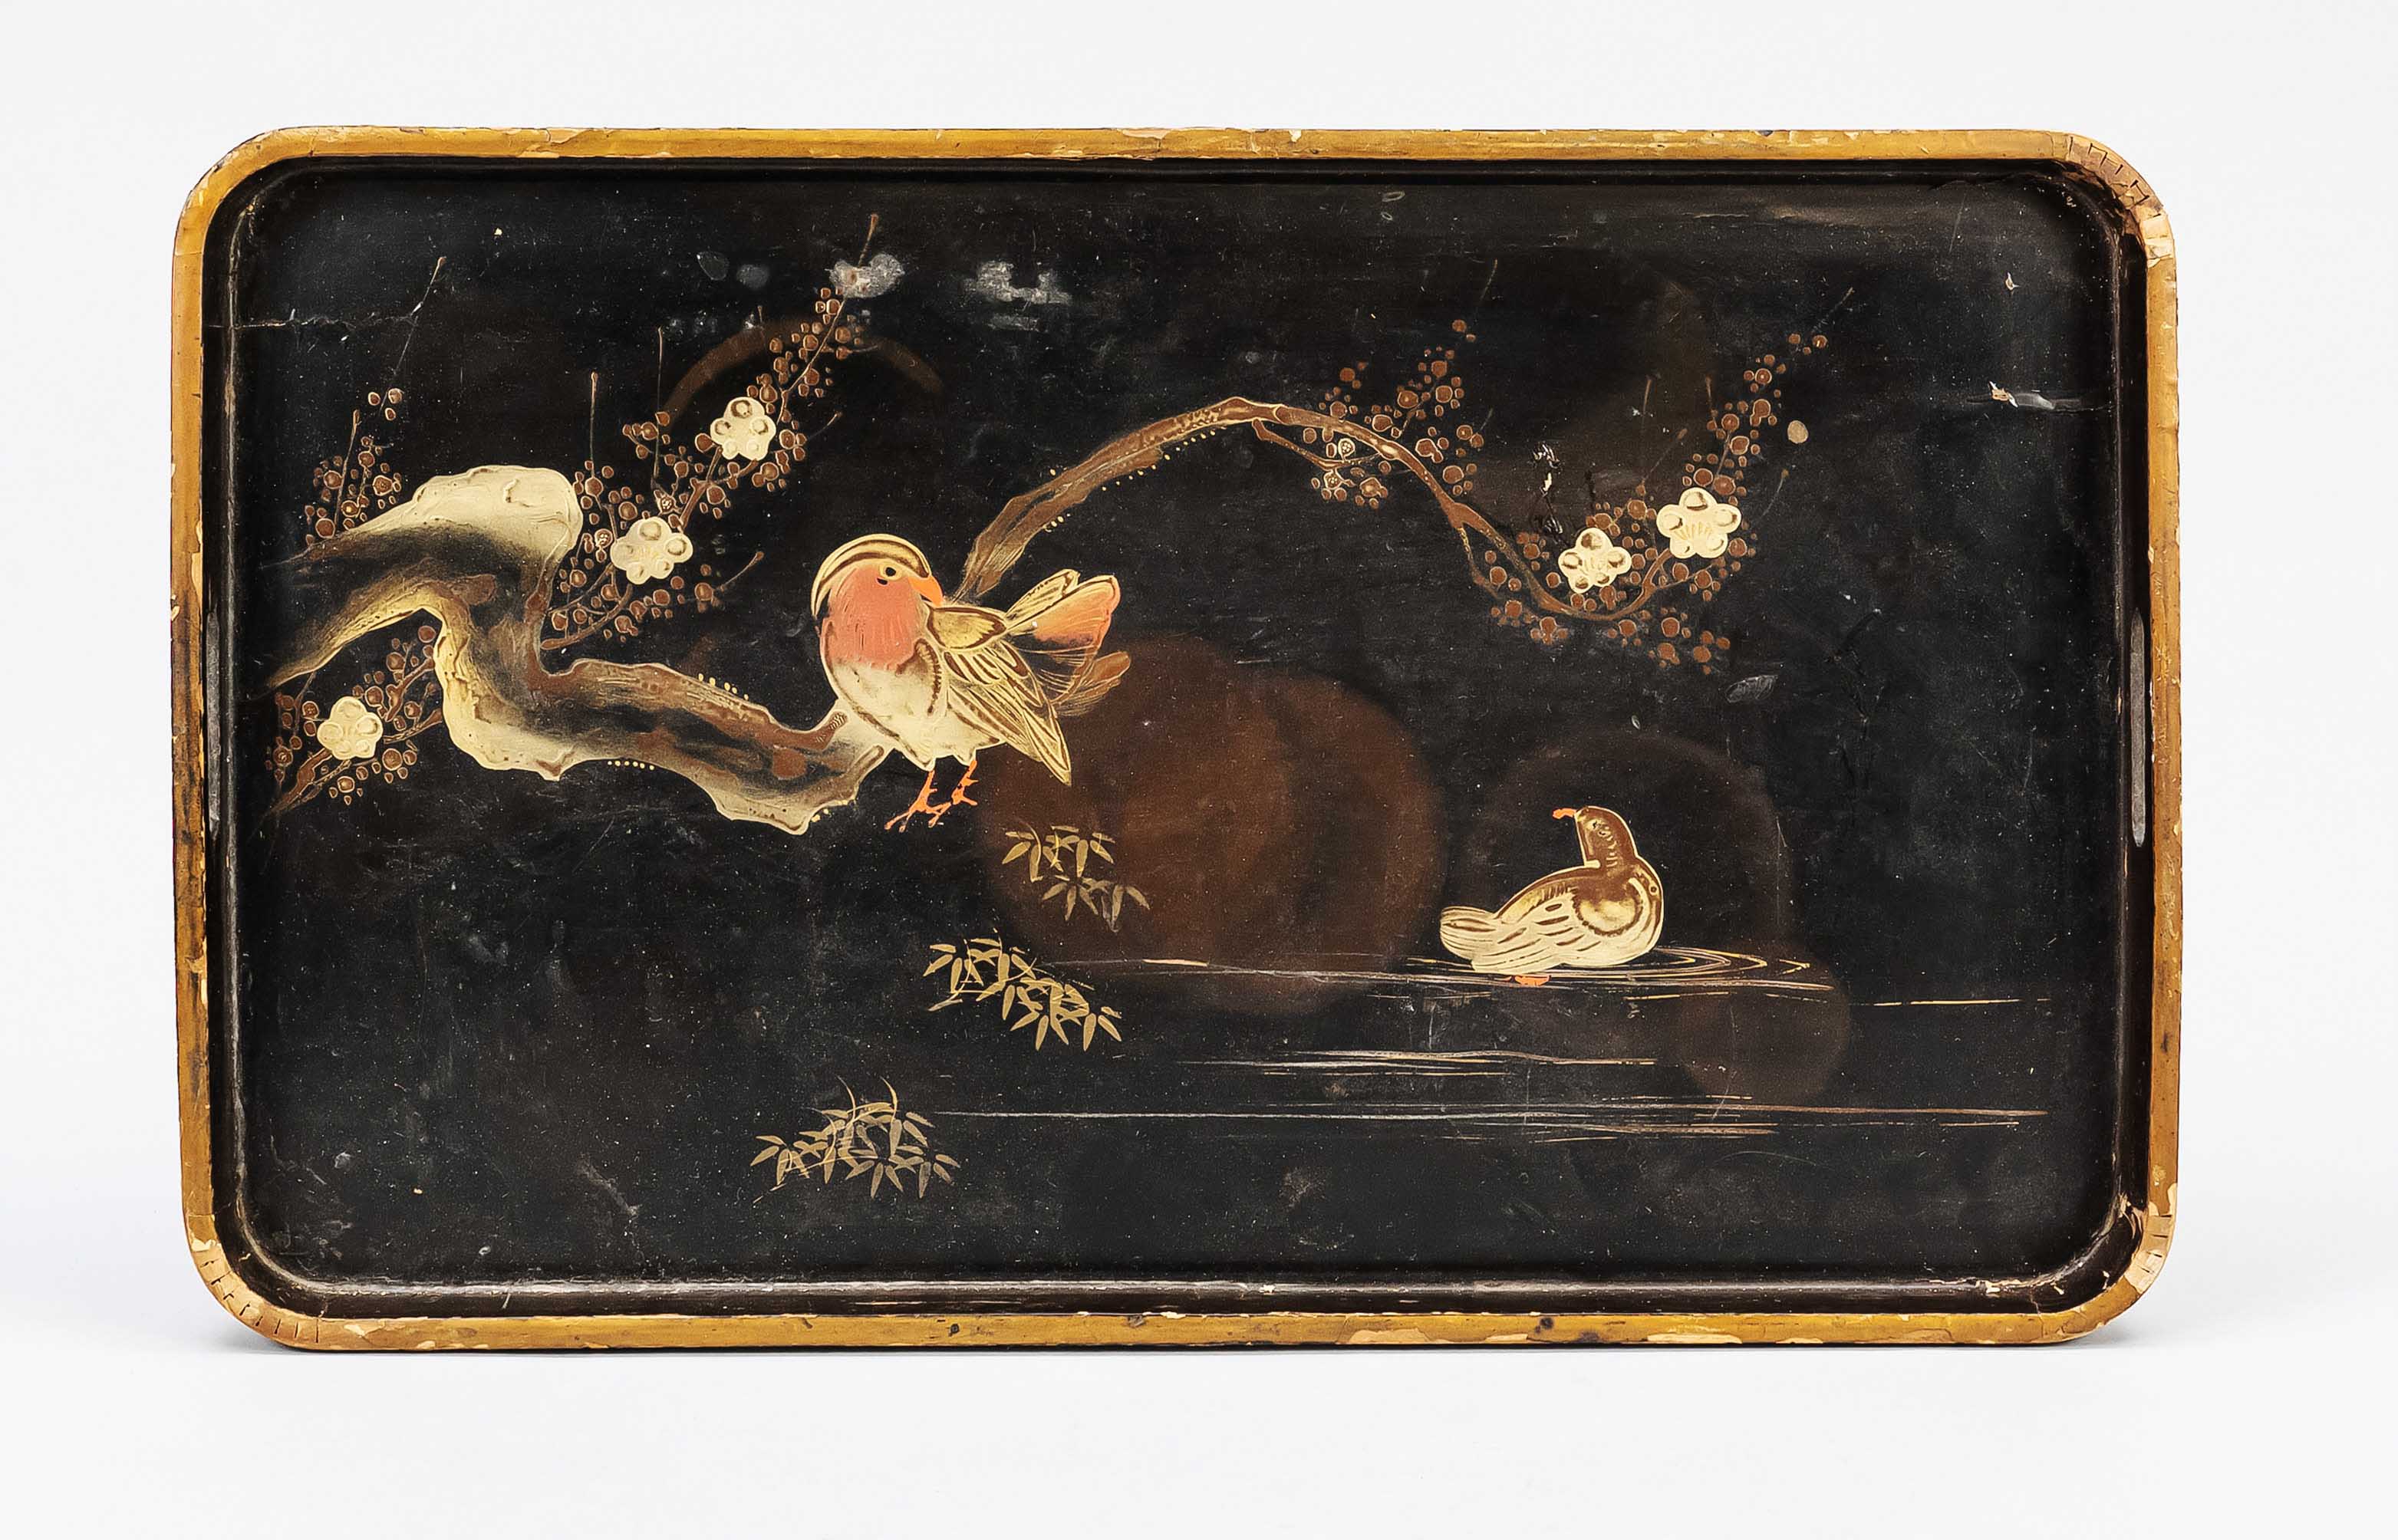 Mandarin duck tray, Japan, early 20th century, black lacquered wooden tray with handles, gold and